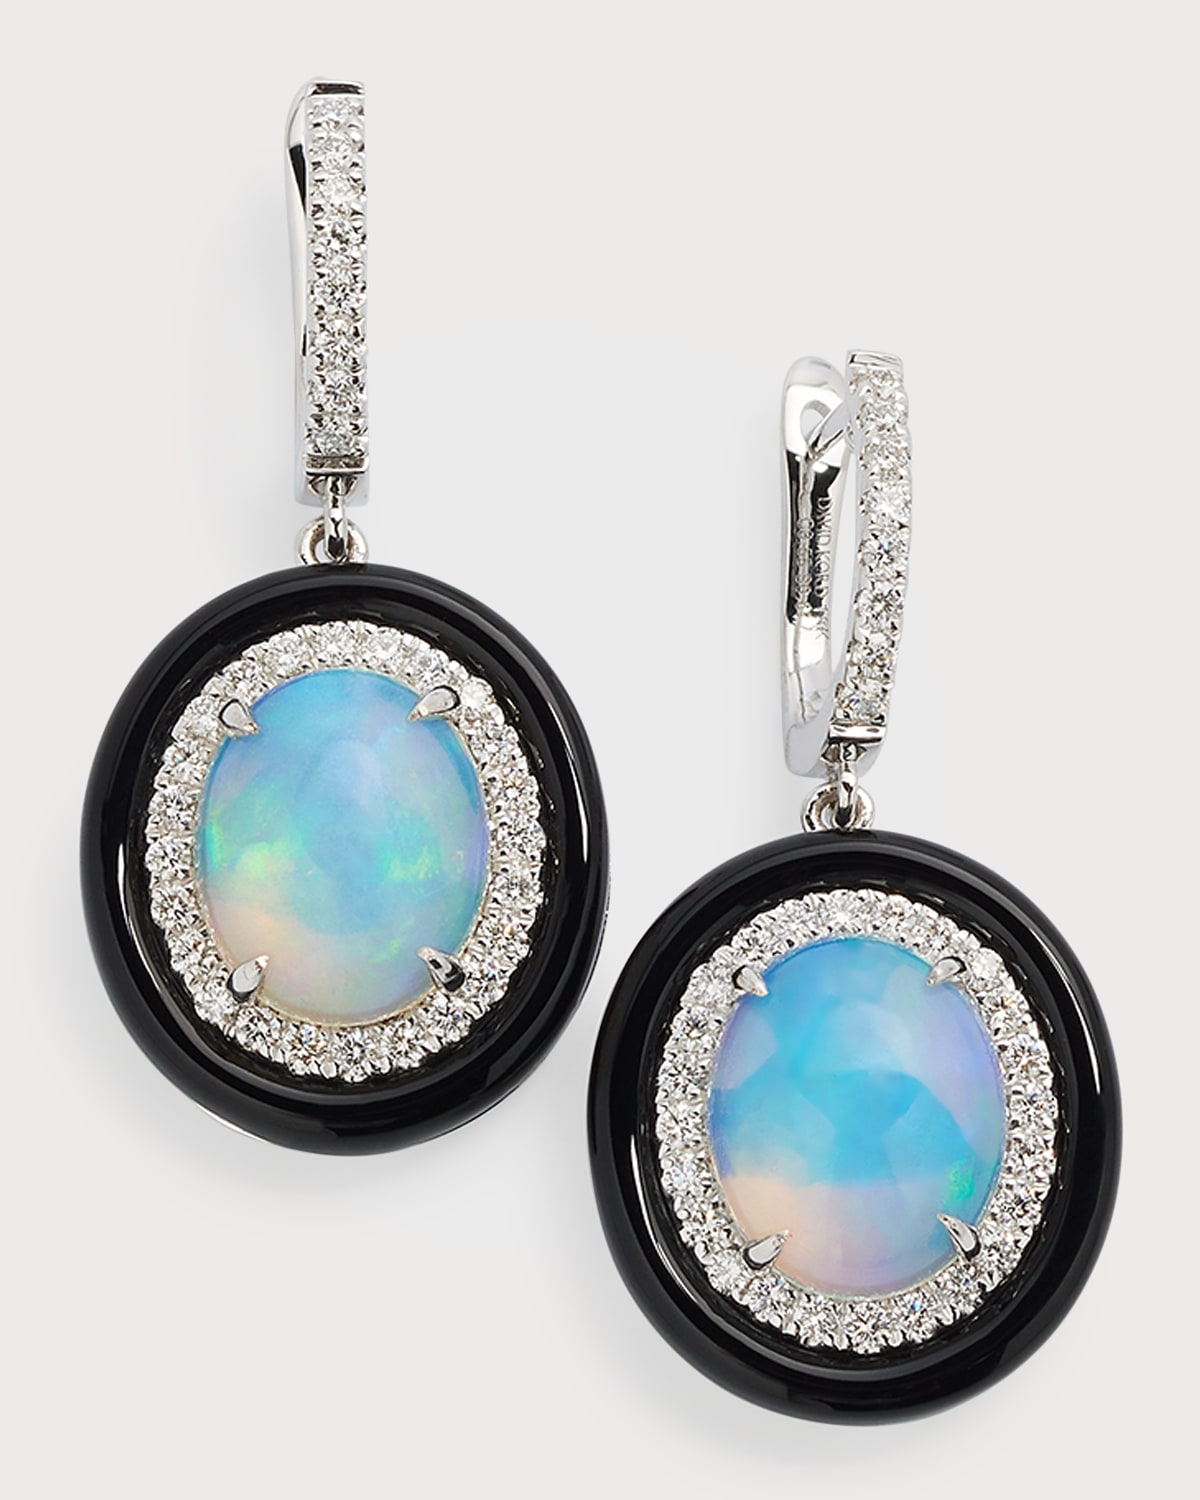 18K White Gold Earrings with Opal Ovals, Diamonds and Black Frame, 3.55tcw